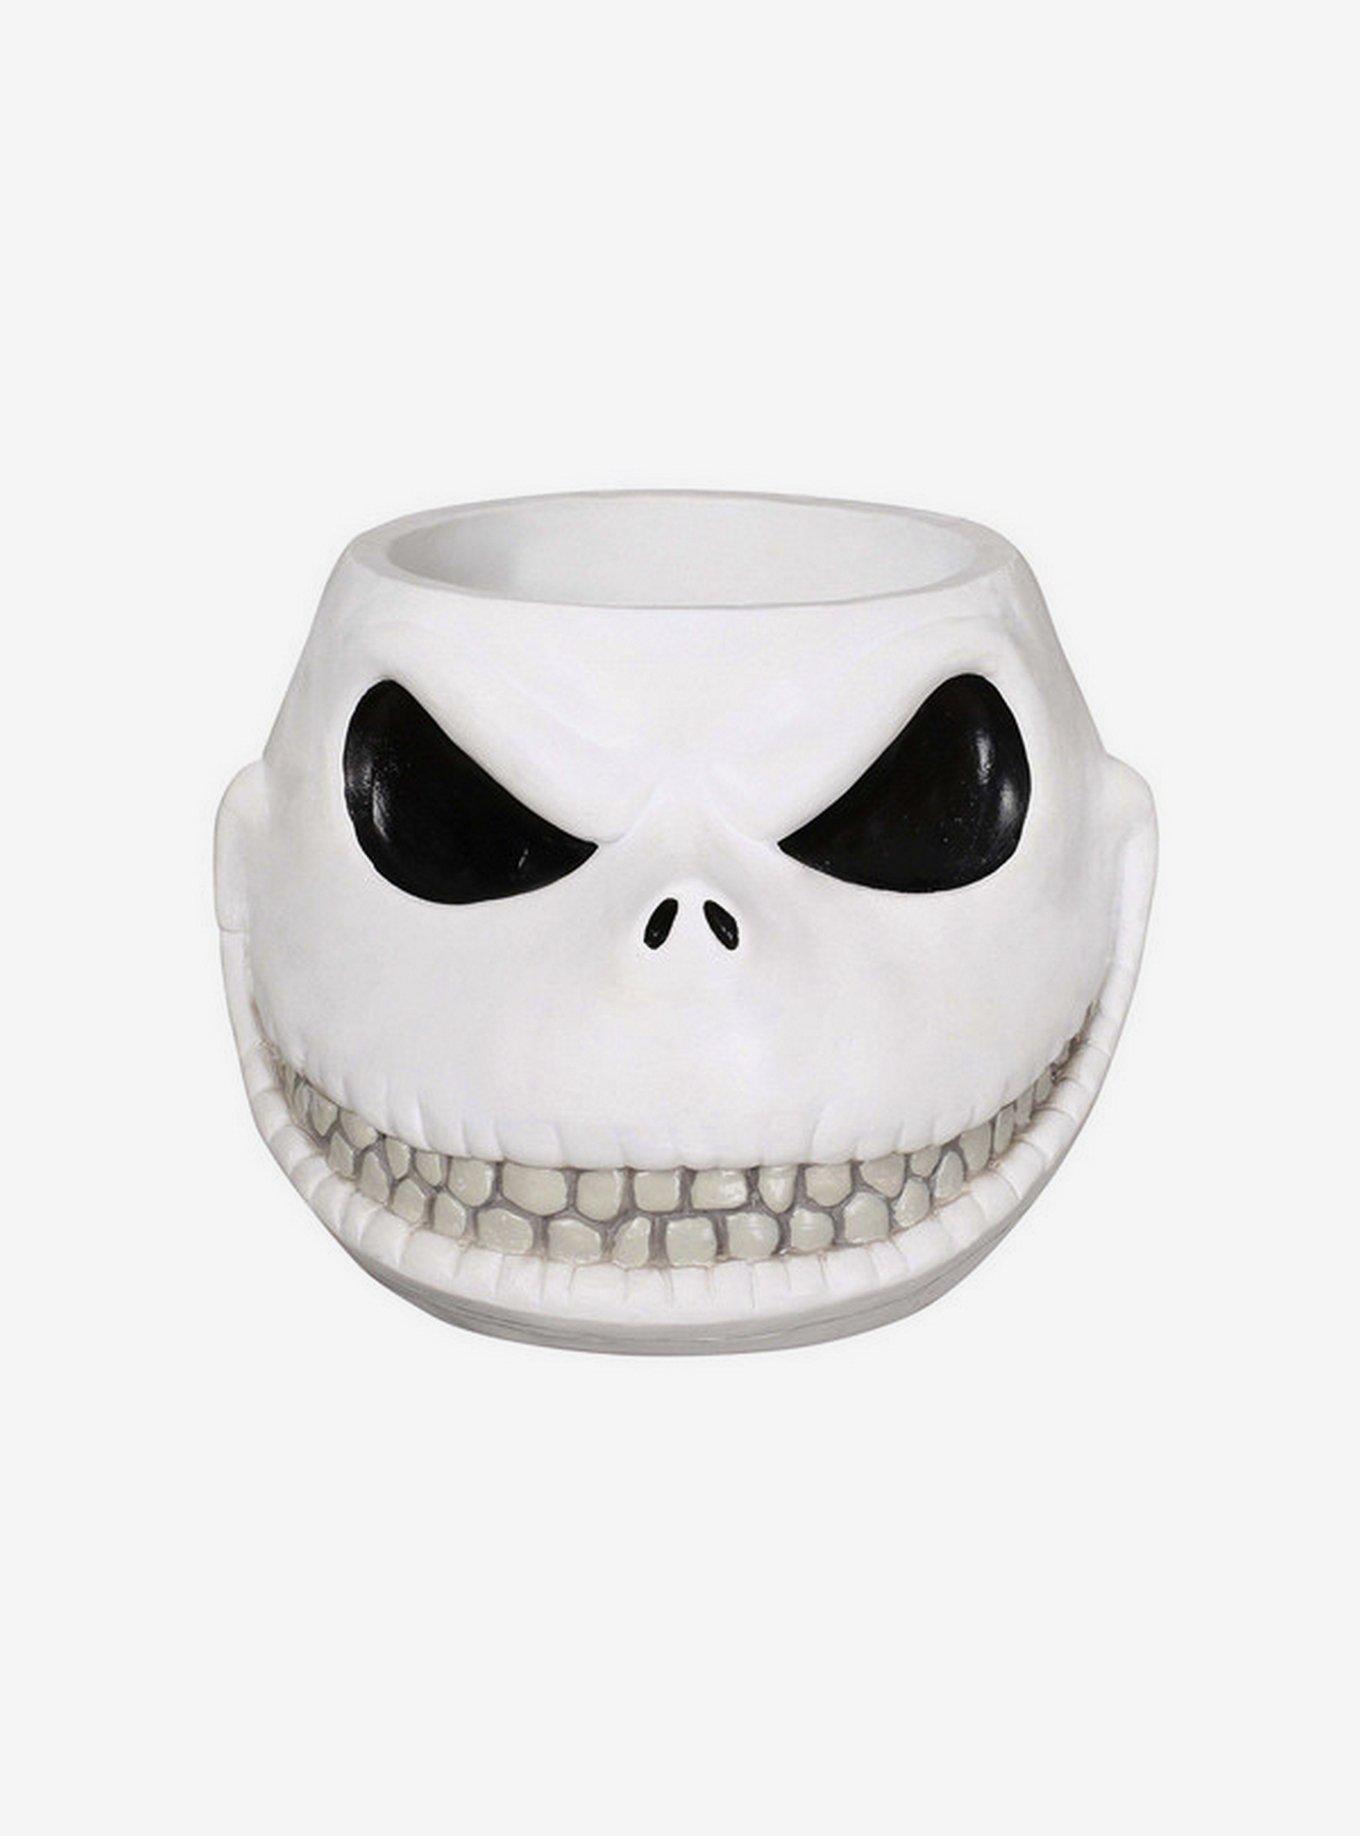 Shop Disney Nightmare Before Christmas Jack 6.75-inch Candy Bowl Decor